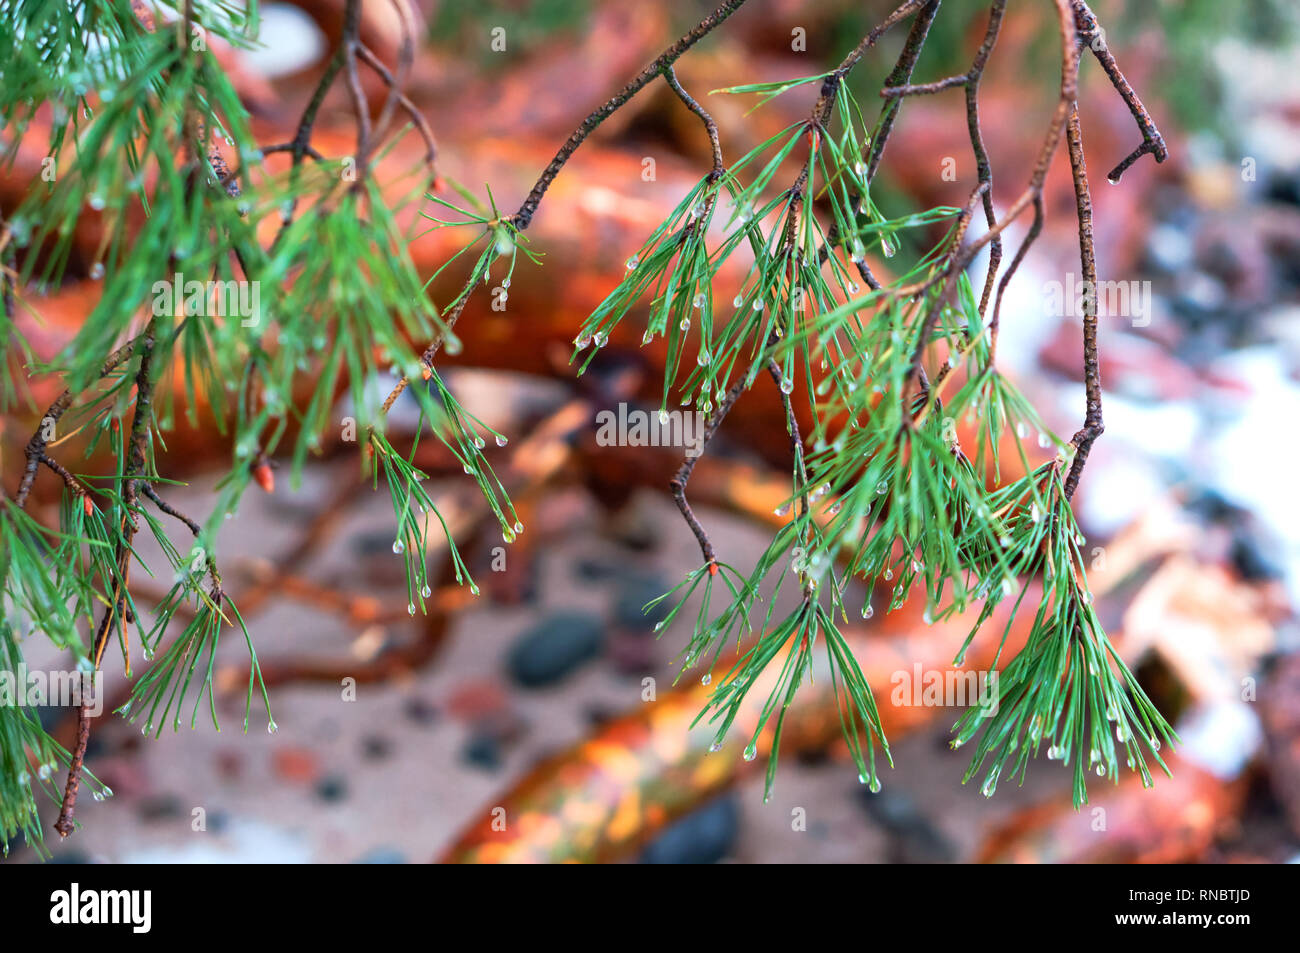 fir branches with cones, rain drops on fir needles Stock Photo